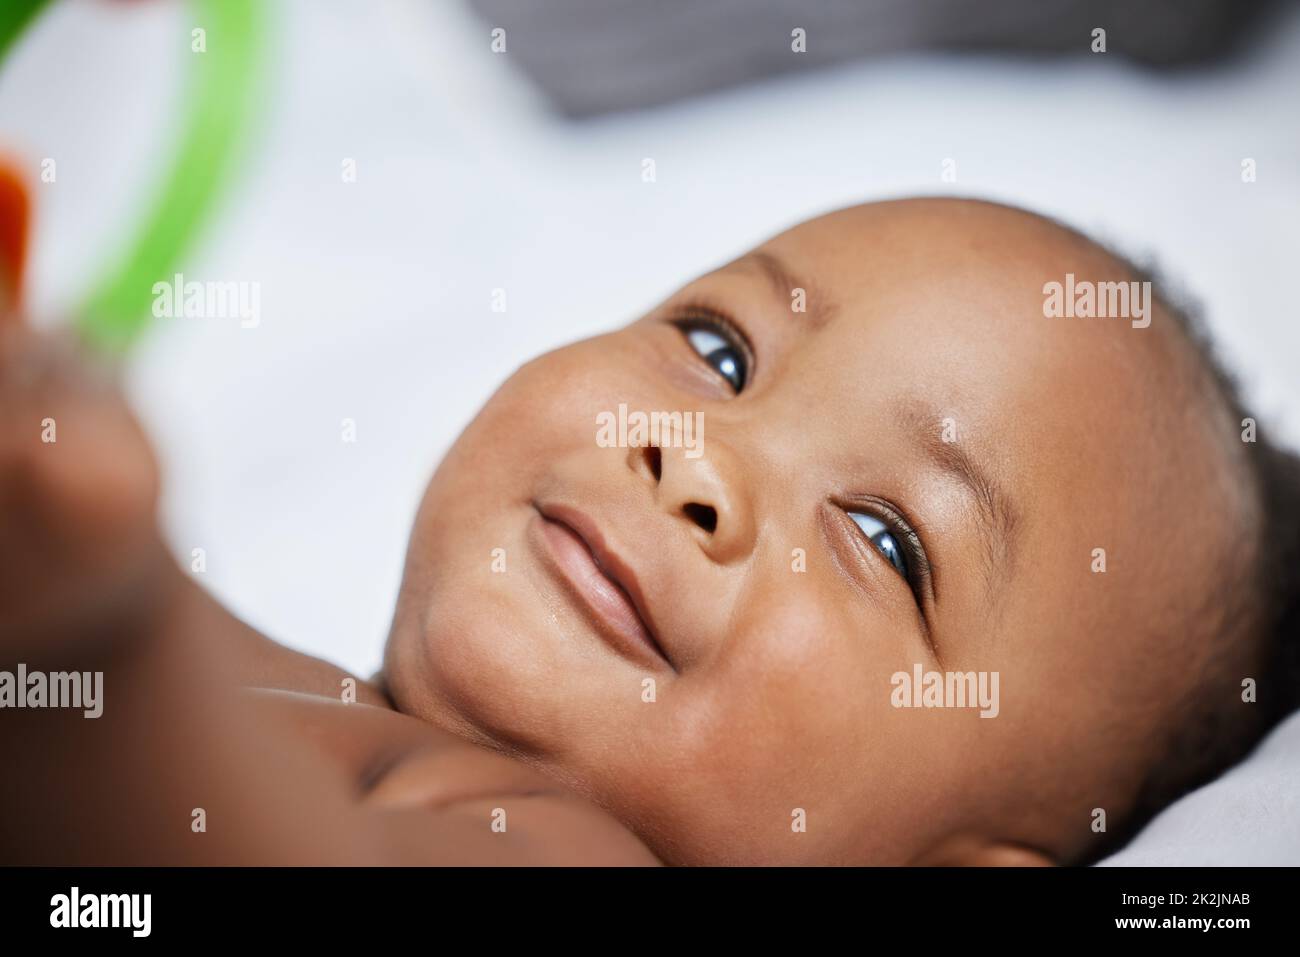 Mom says that Im the cutest baby. Shot of a little baby girl playing with toys in the doctors office. Stock Photo